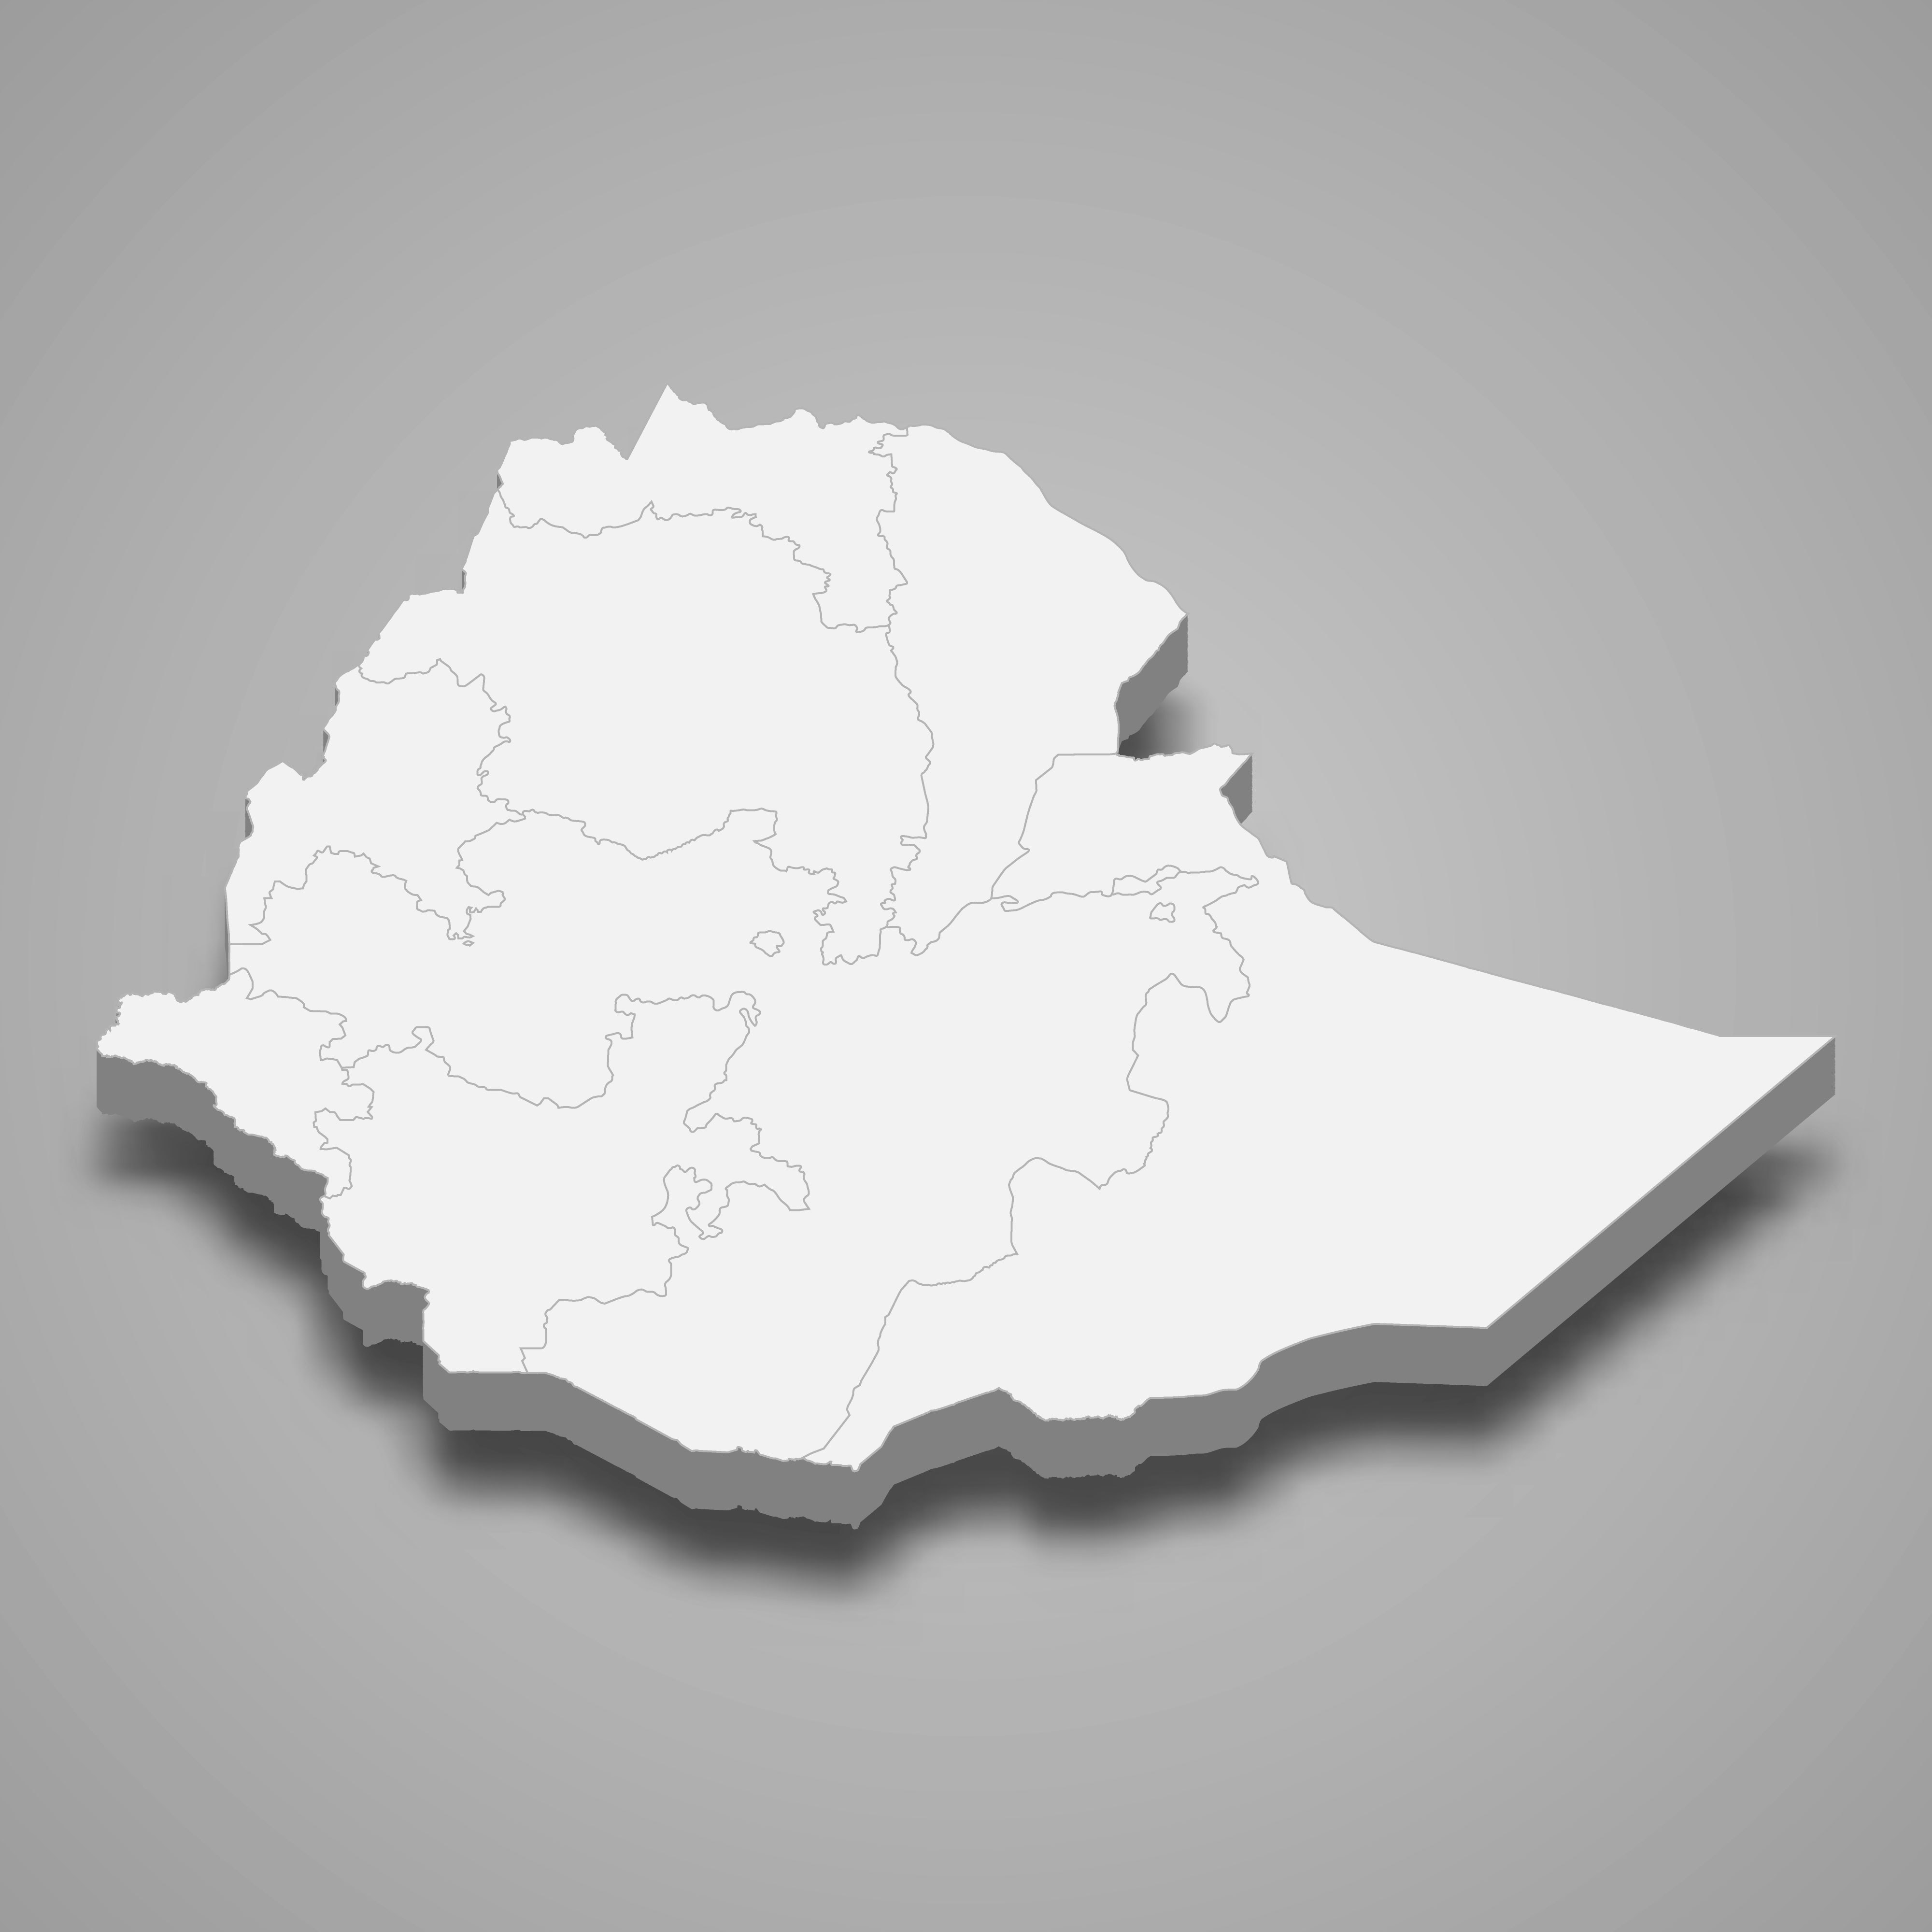 3d map of Ethiopia with borders of regions. 3d map with borders of regions Template for your design